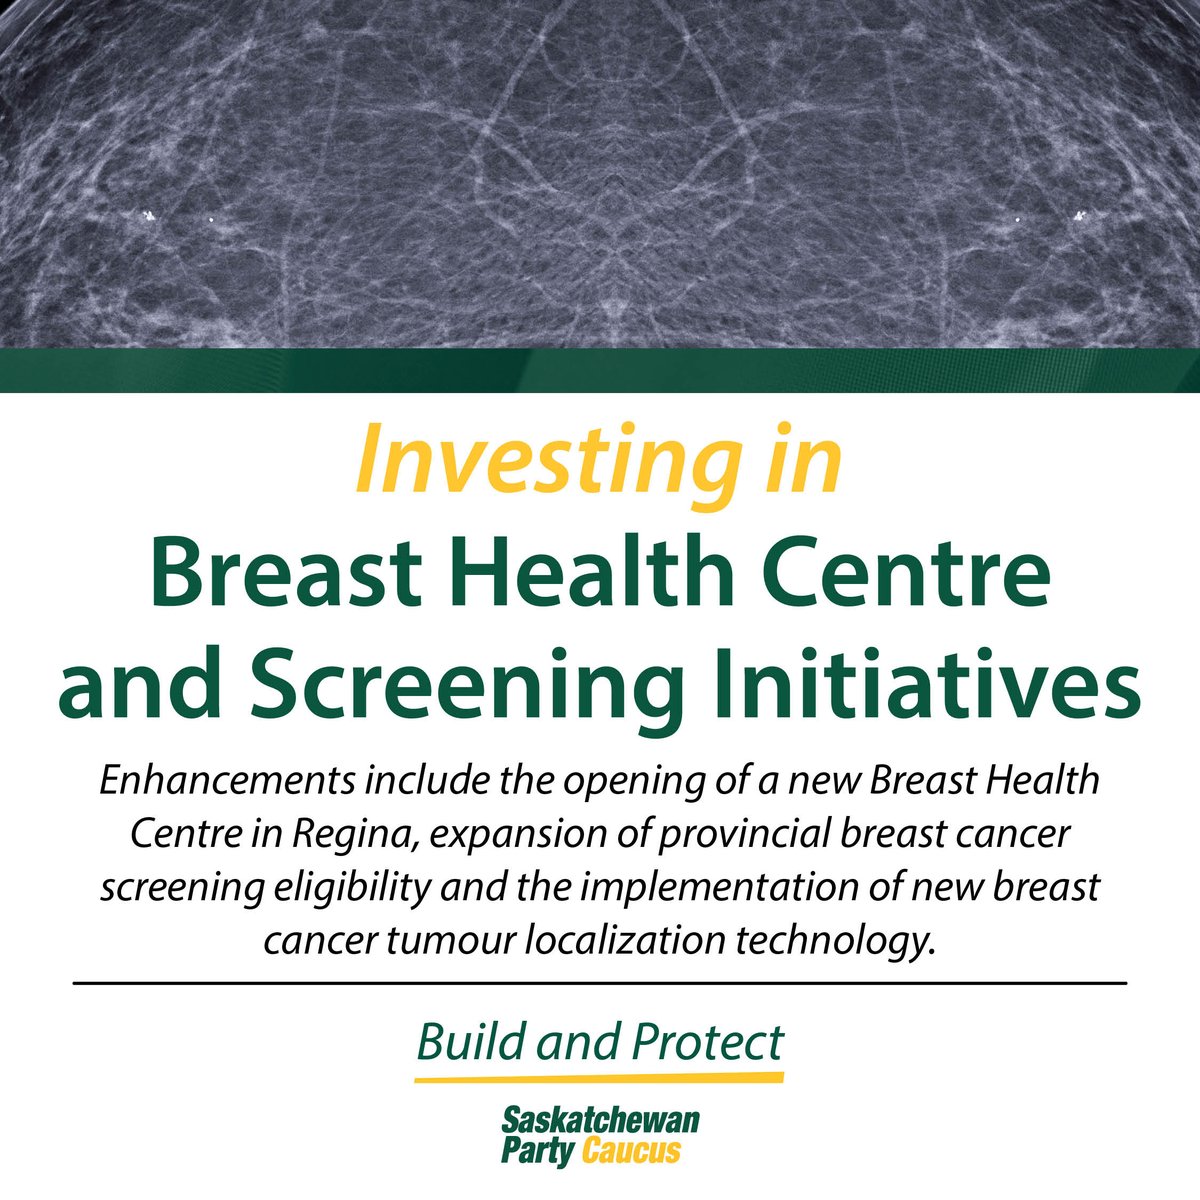 Regina’s new Breast Health Centre will provide a co-location of services, such as diagnostic imaging, consultation with specialists and surgeons, patient education, support and navigation as well as on-site access to post treatment care, such as therapies and rehabilitation.